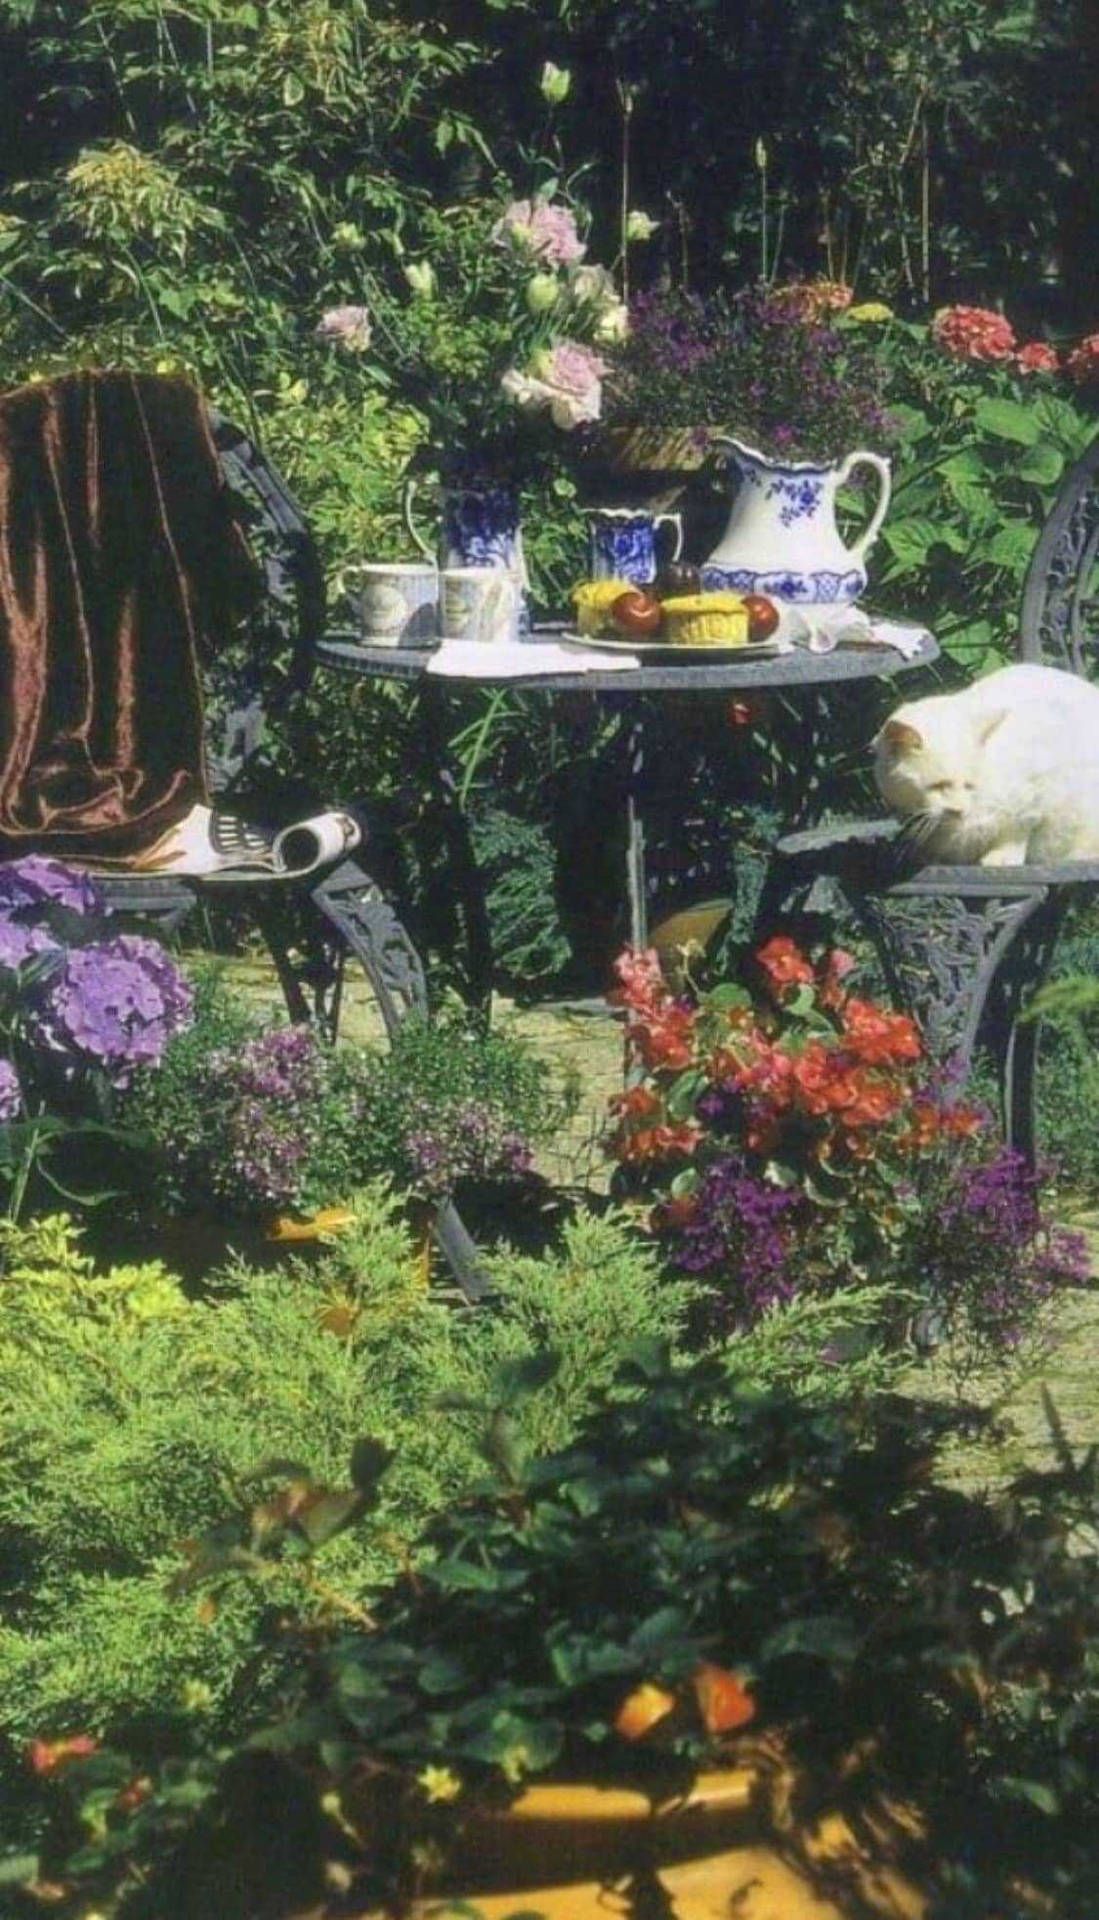 A cat sitting on an outdoor table with flowers - Cottagecore, garden